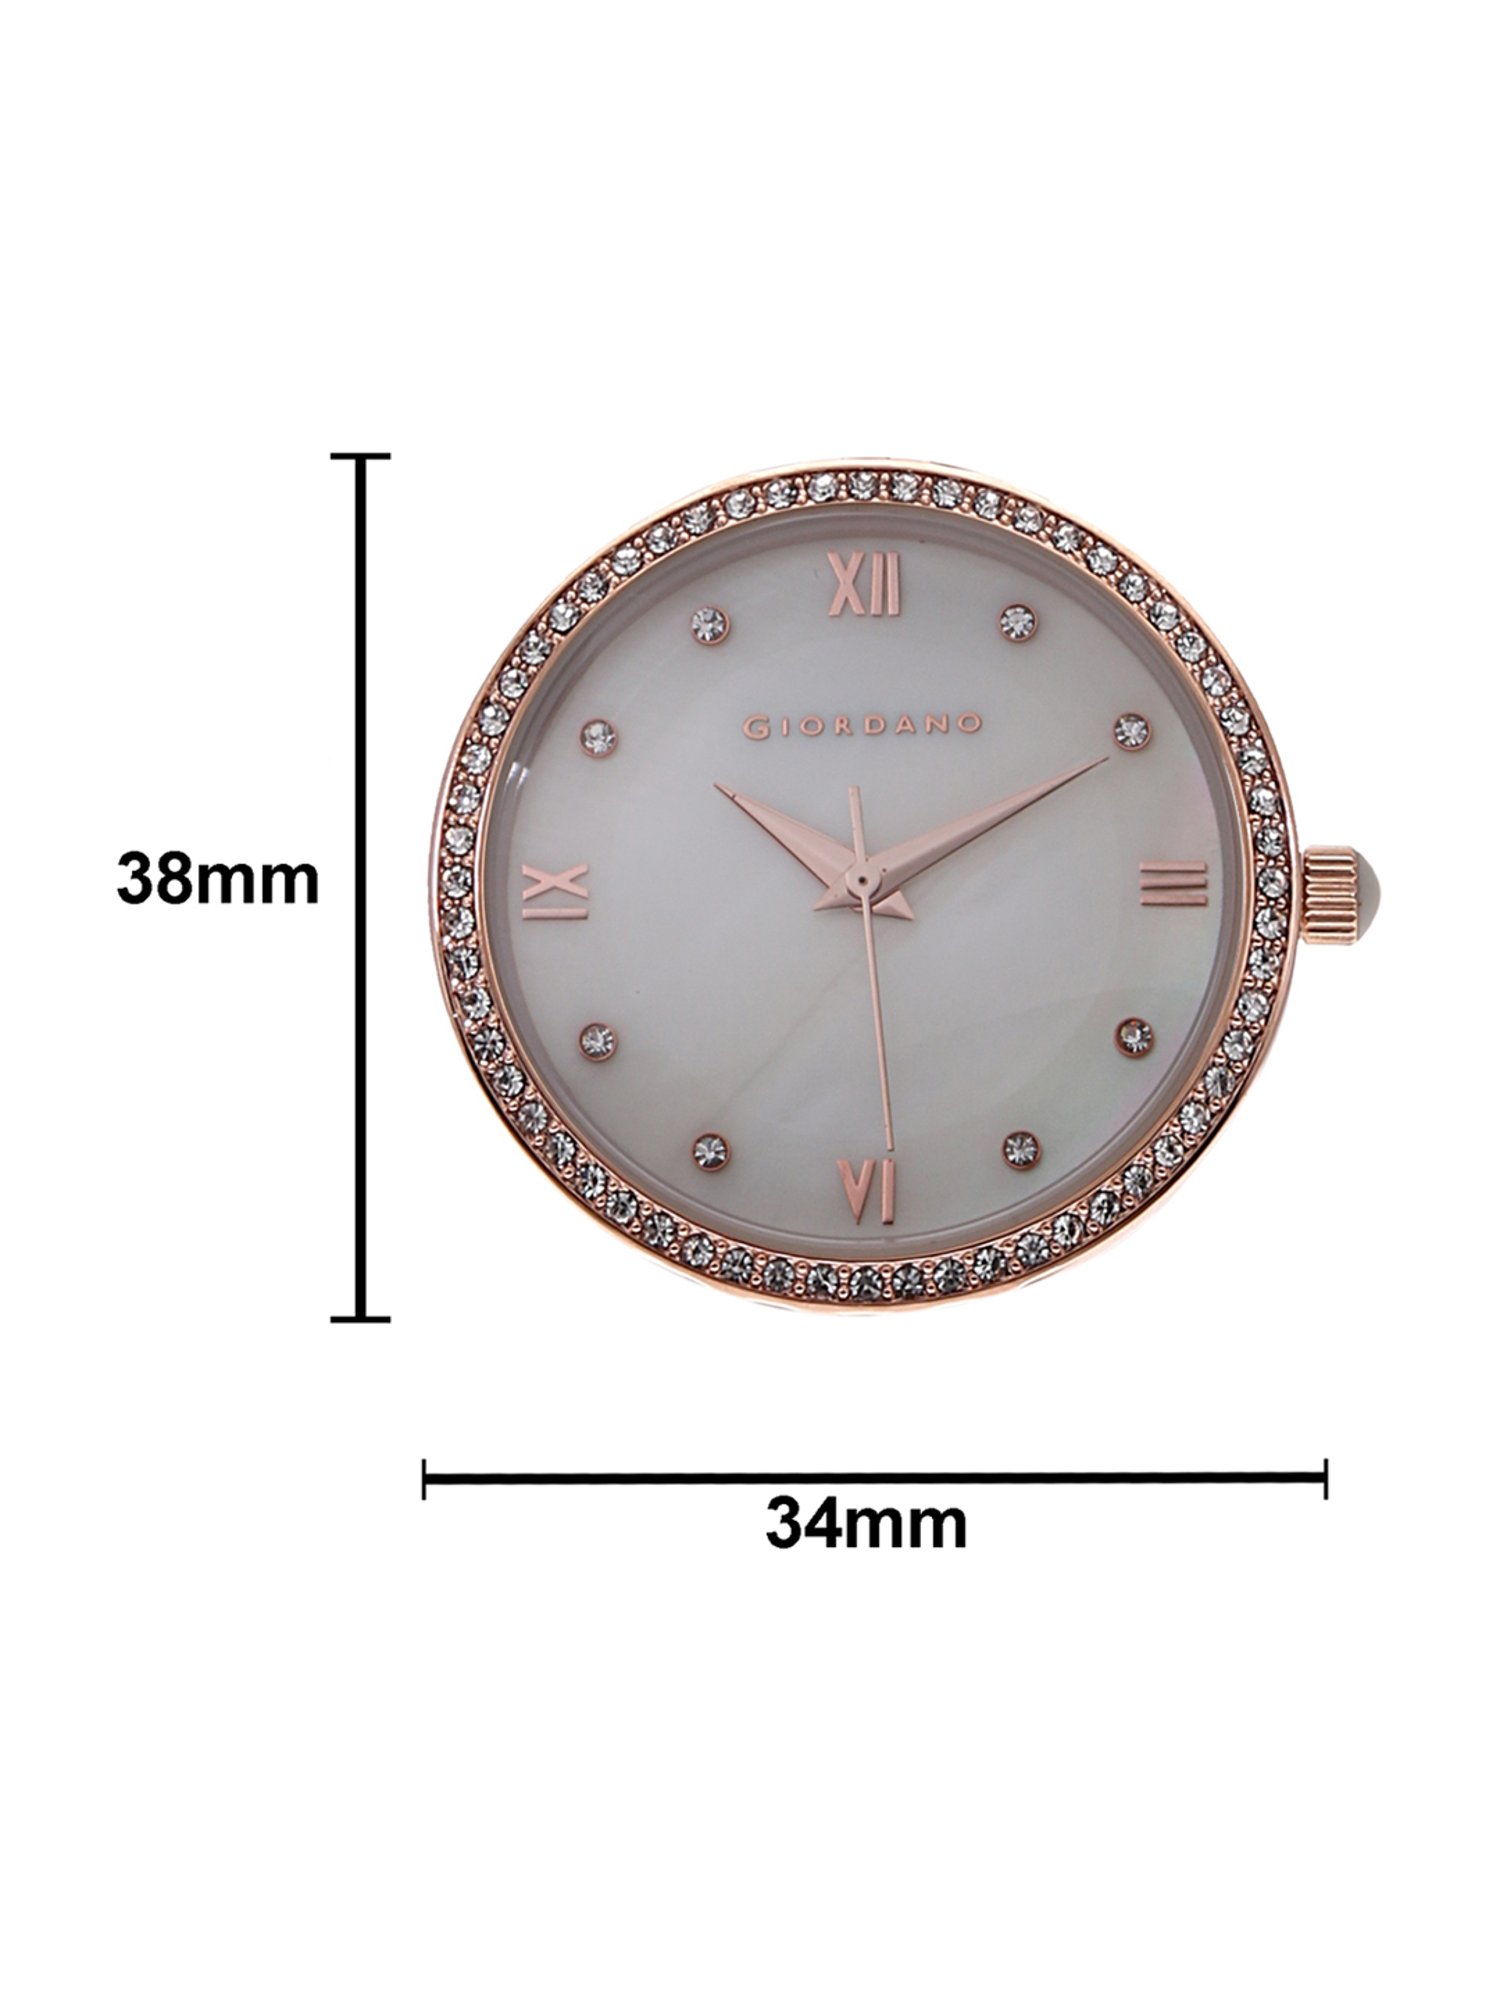 Giordano AW22 Collection Analog Watch for Women Stylish Metal Strap| 3  Hands Mechanism with Water Resistance Latest Generation Premium Analogue  Watches Ideal Gift for Female, Ladies & Girls - GD4071 : Amazon.in: Fashion